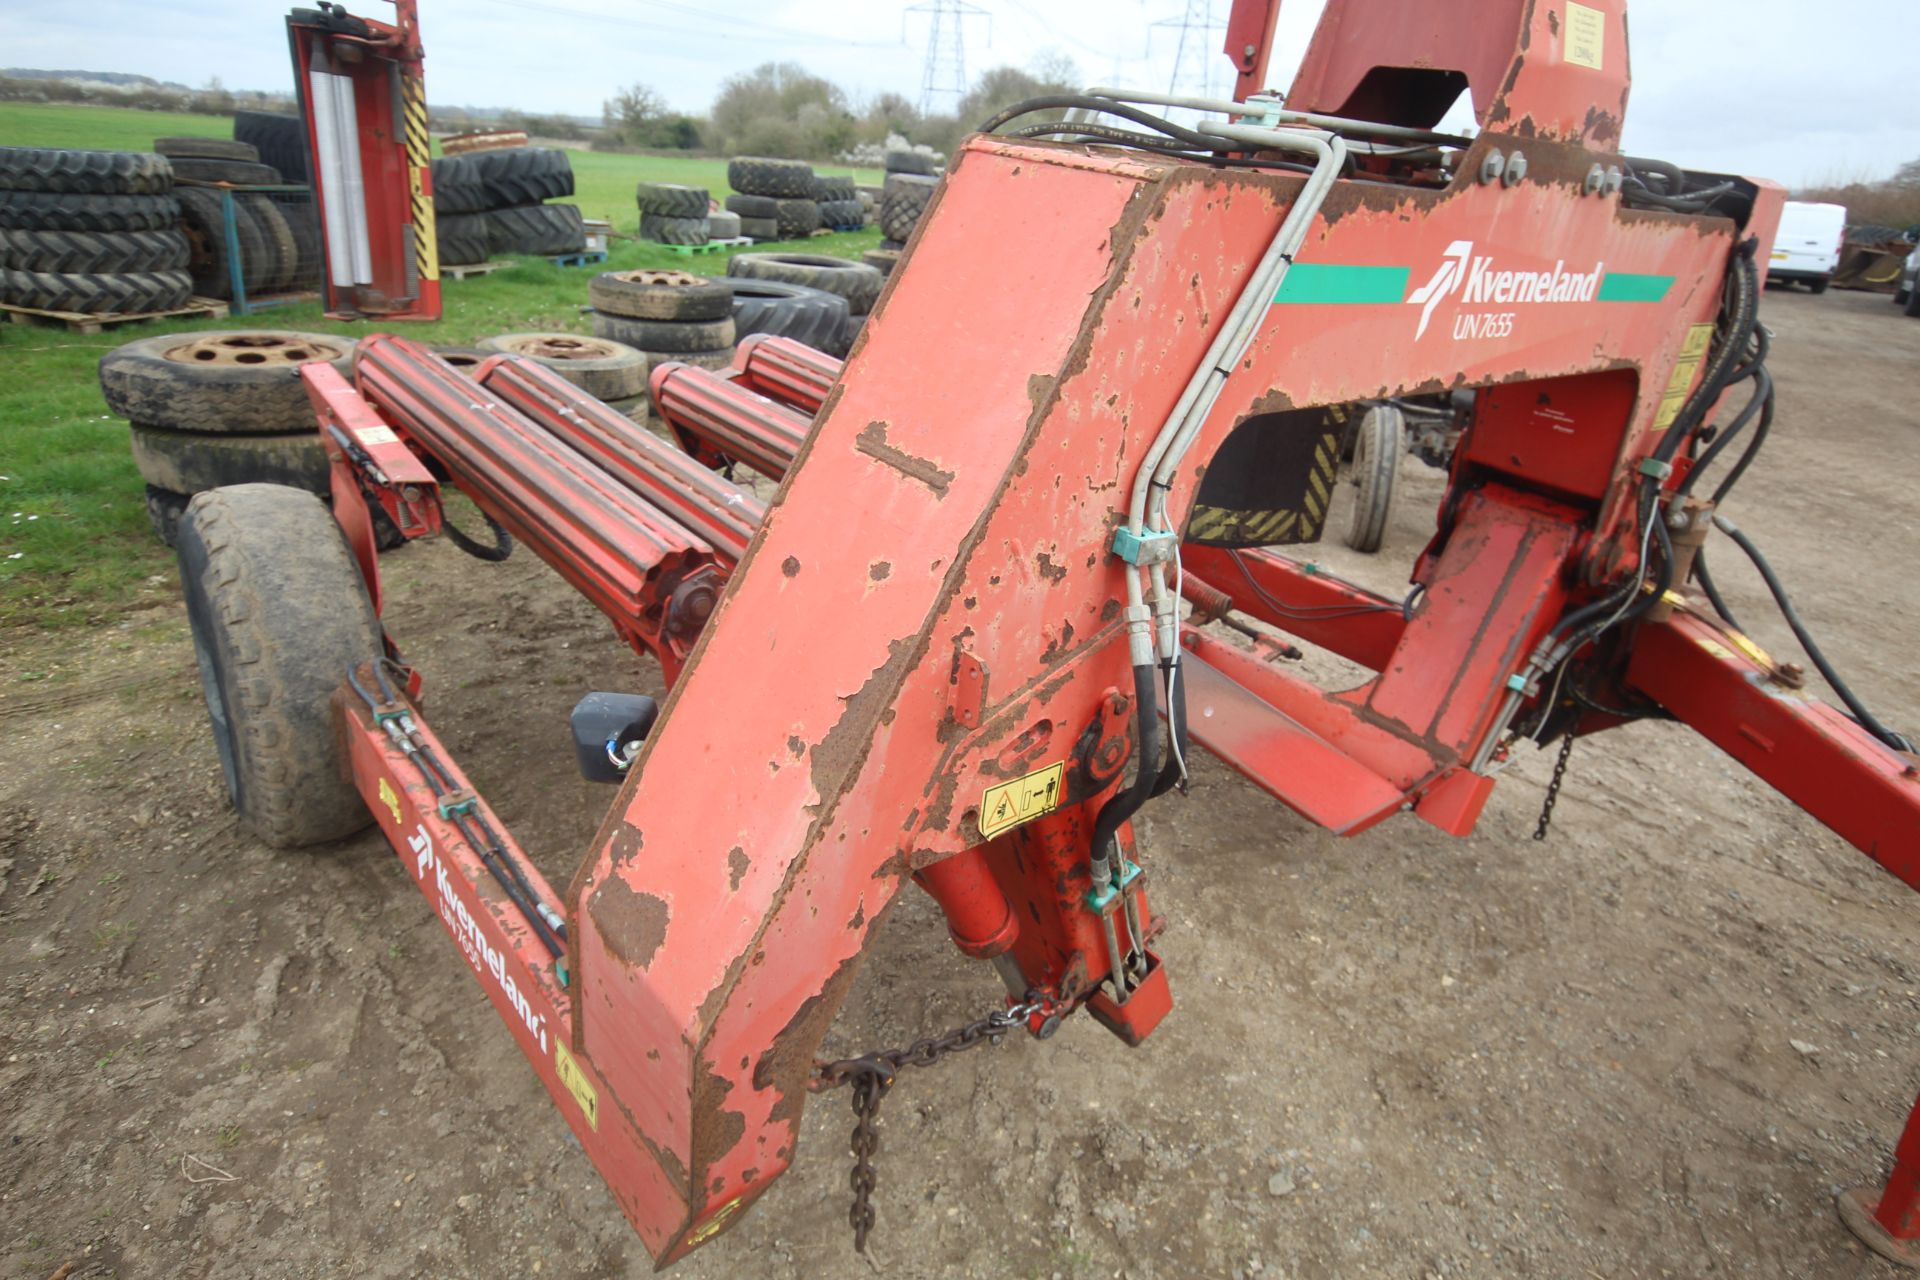 Kverneland Taruup UN7655 trailed square/ round bale wrapper. 1997. Control box held. V - Image 26 of 29